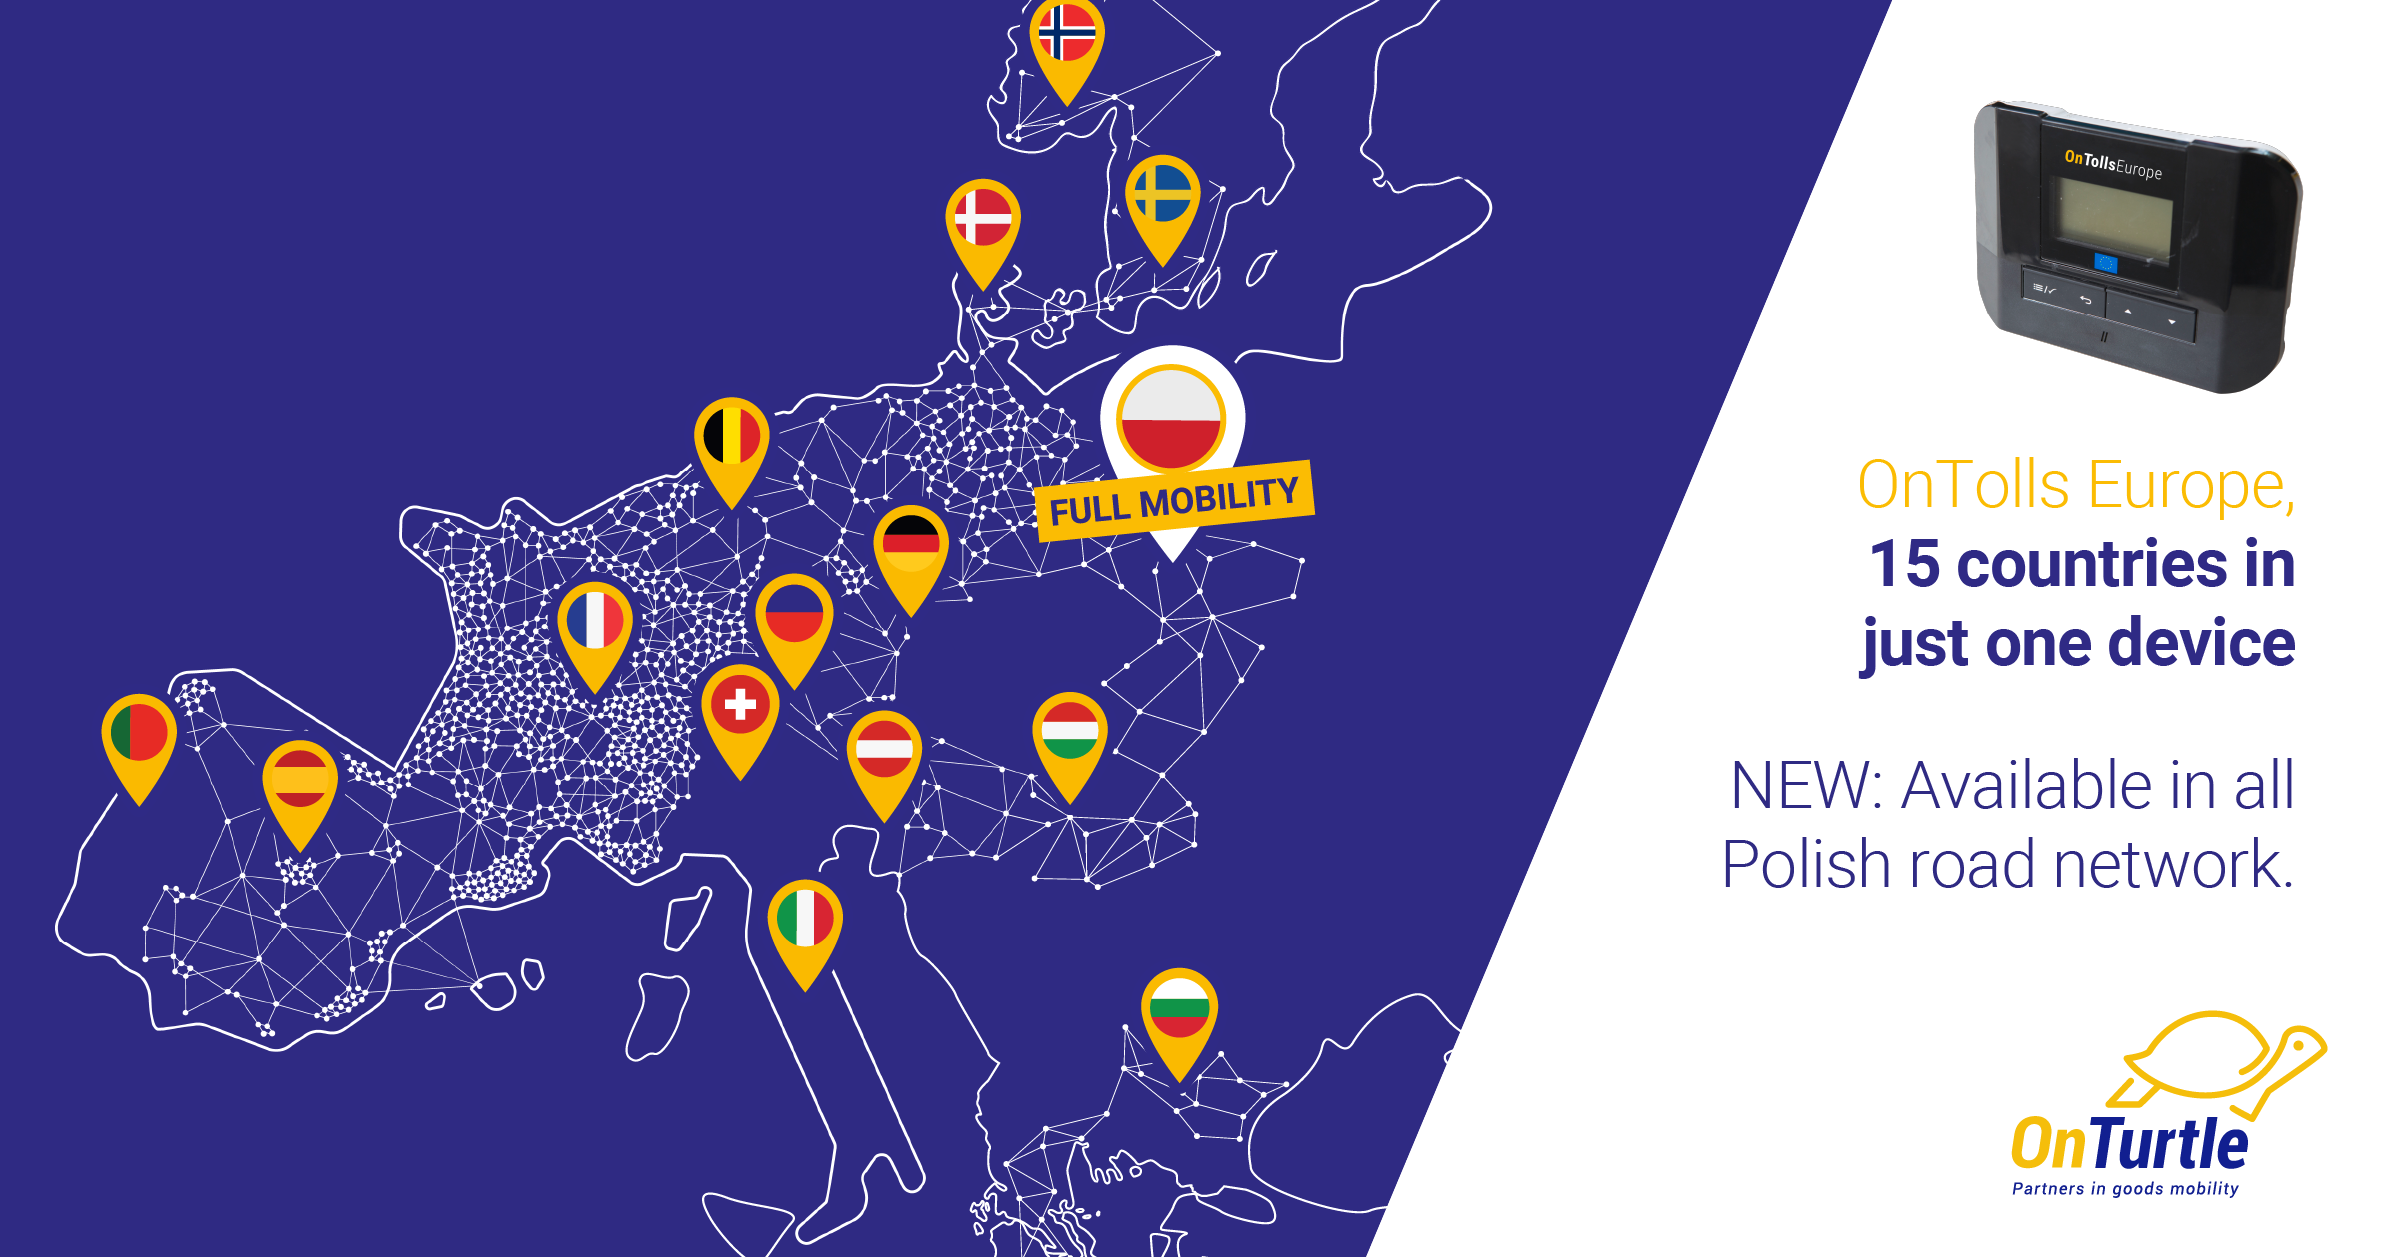 OnTolls Europe expands its coverage across Poland